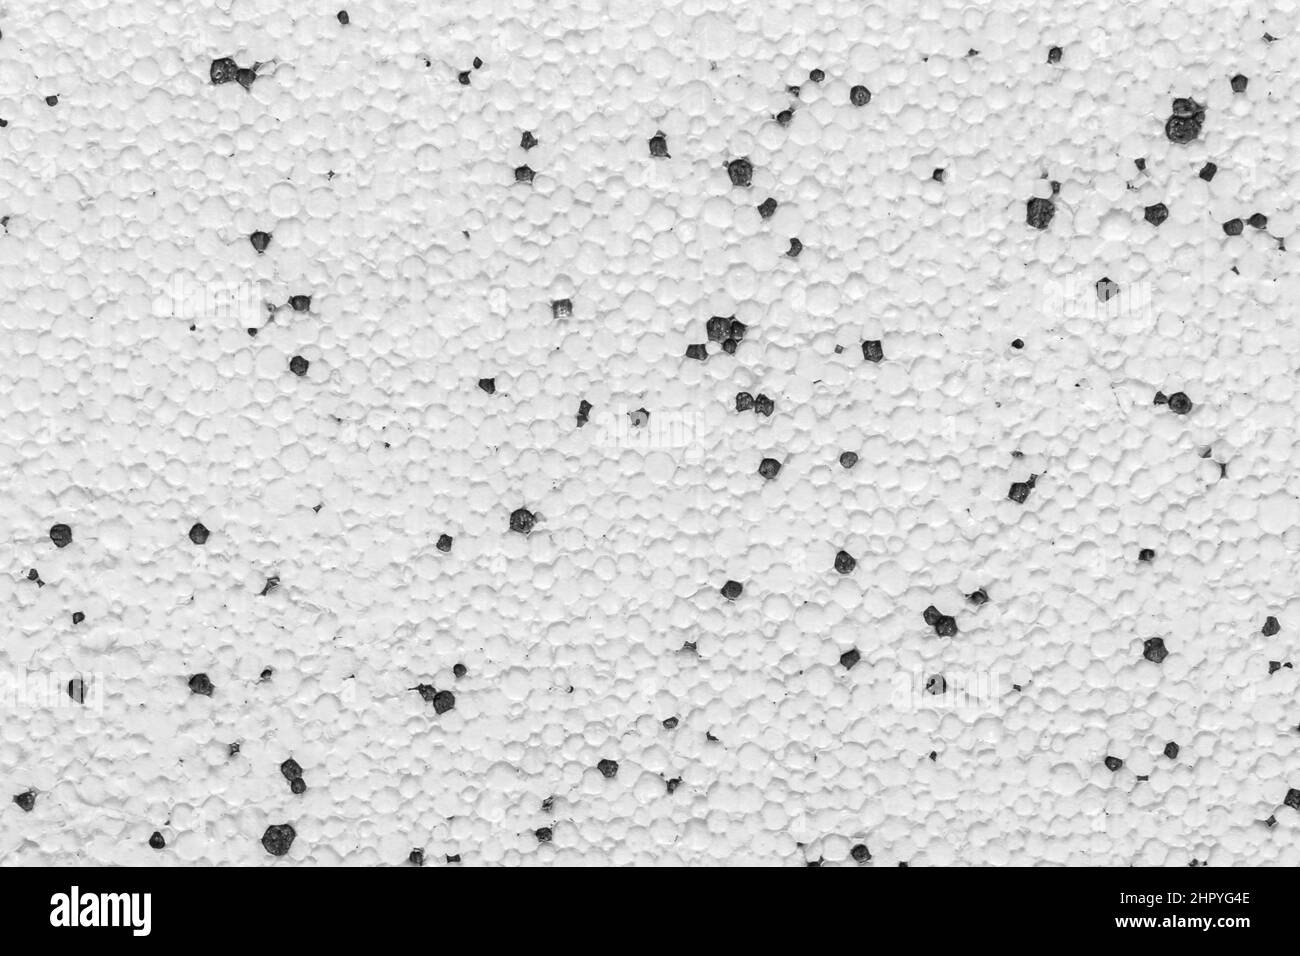 Styrofoam Polystyrene Plasterboard Drywall Foam Building Material Surface White With Abstract Black Pattern Dots Wall Texture Background. Stock Photo